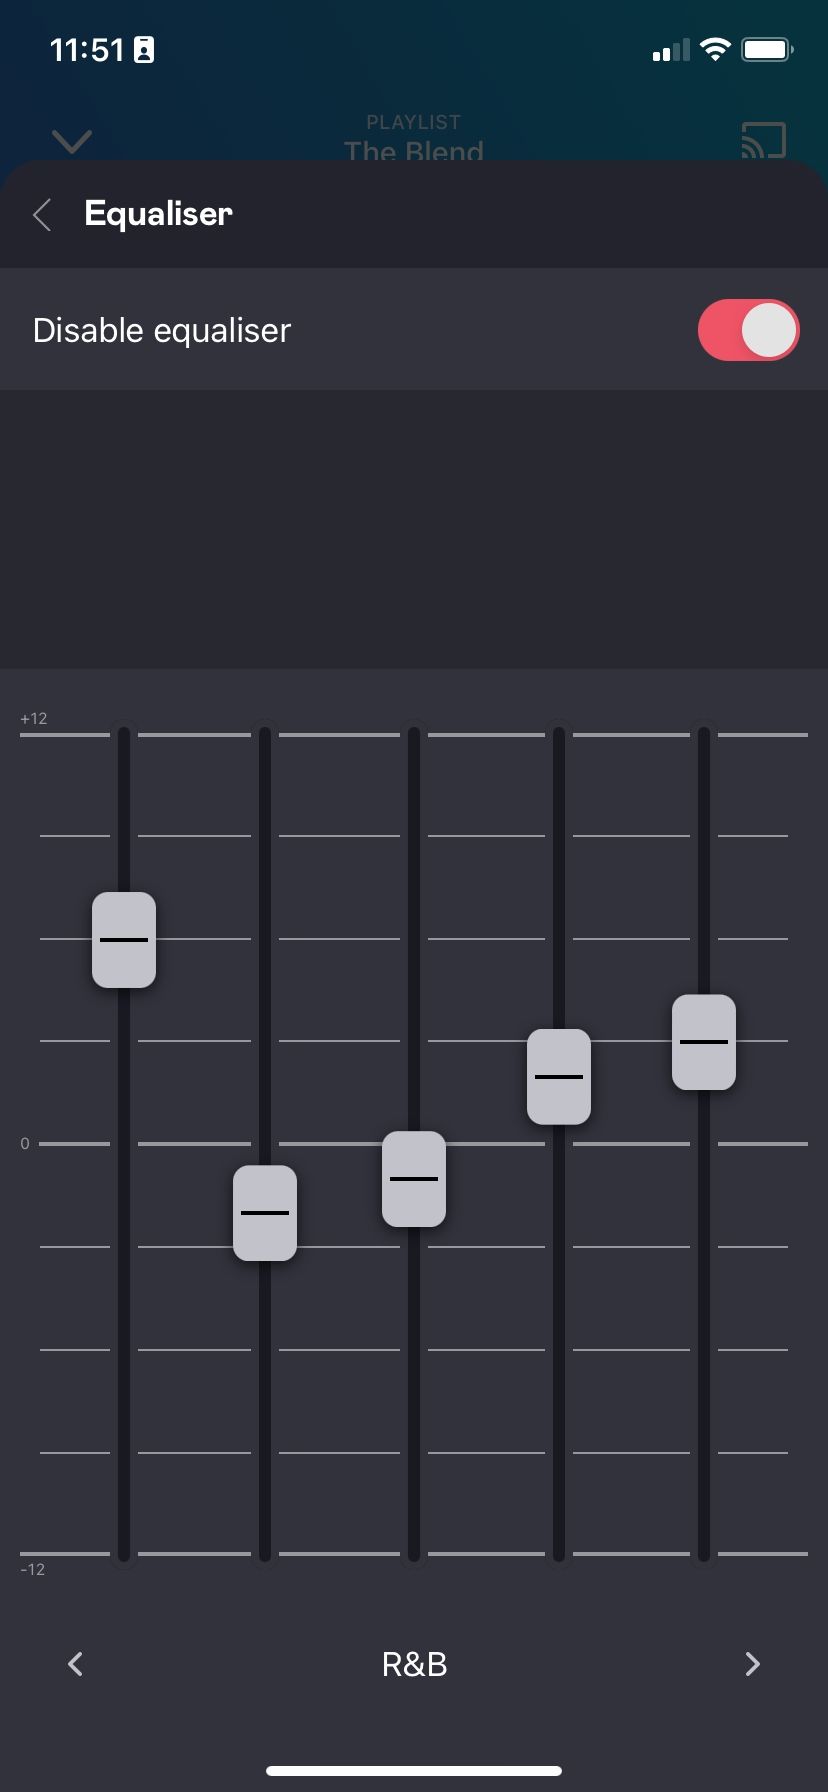 Deezer's Equalizer settings page on iOS